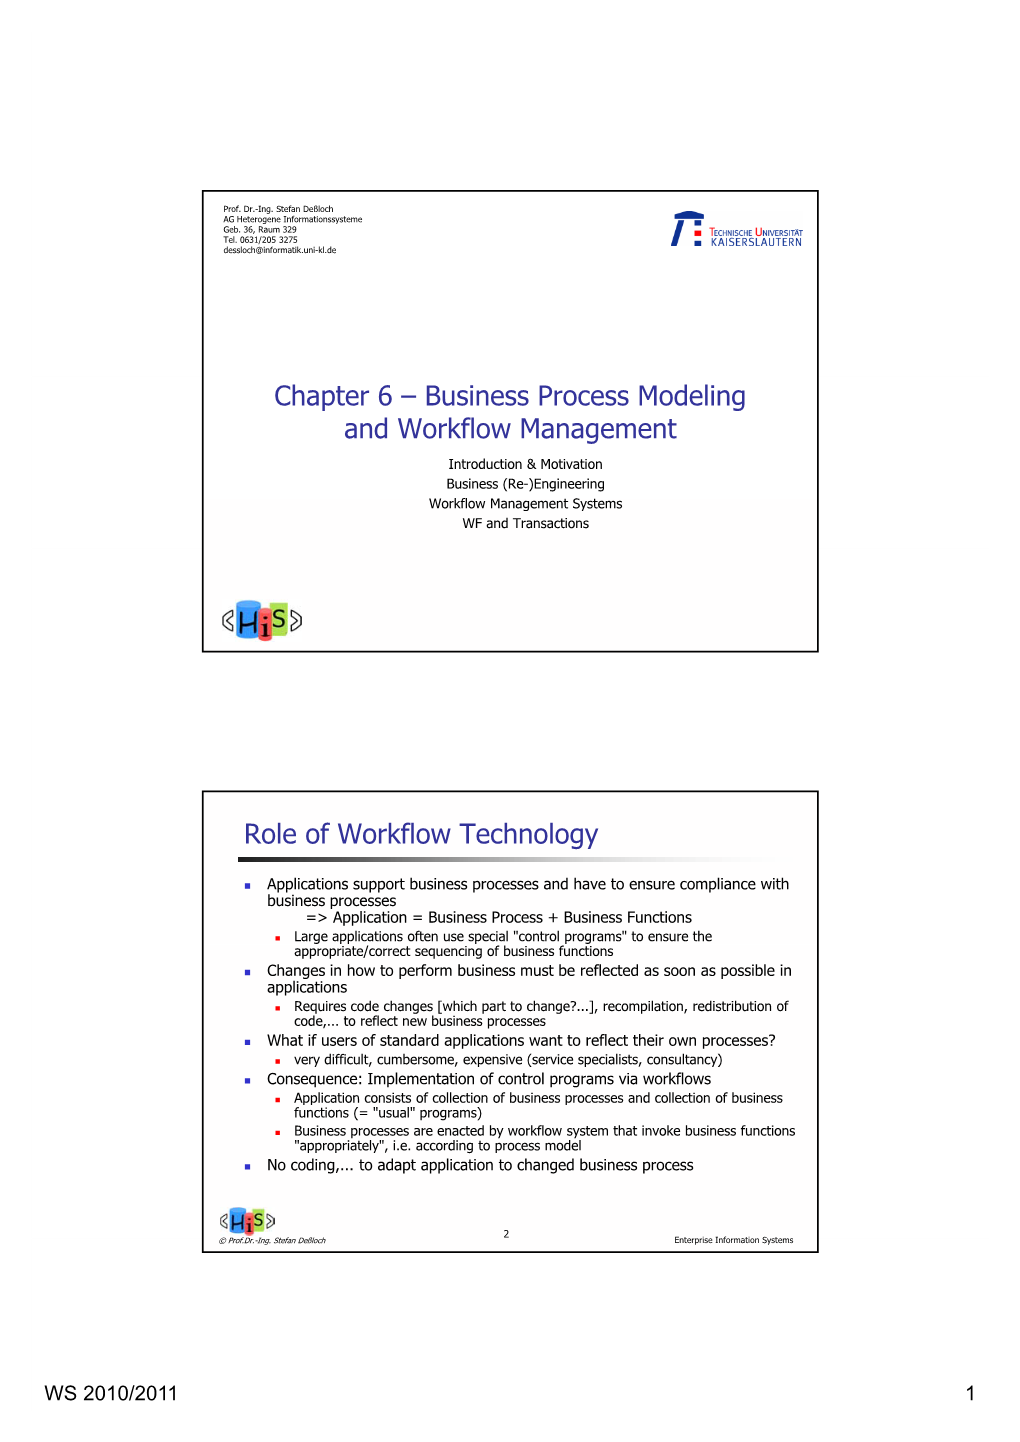 Business Process Modeling and Workflow Management